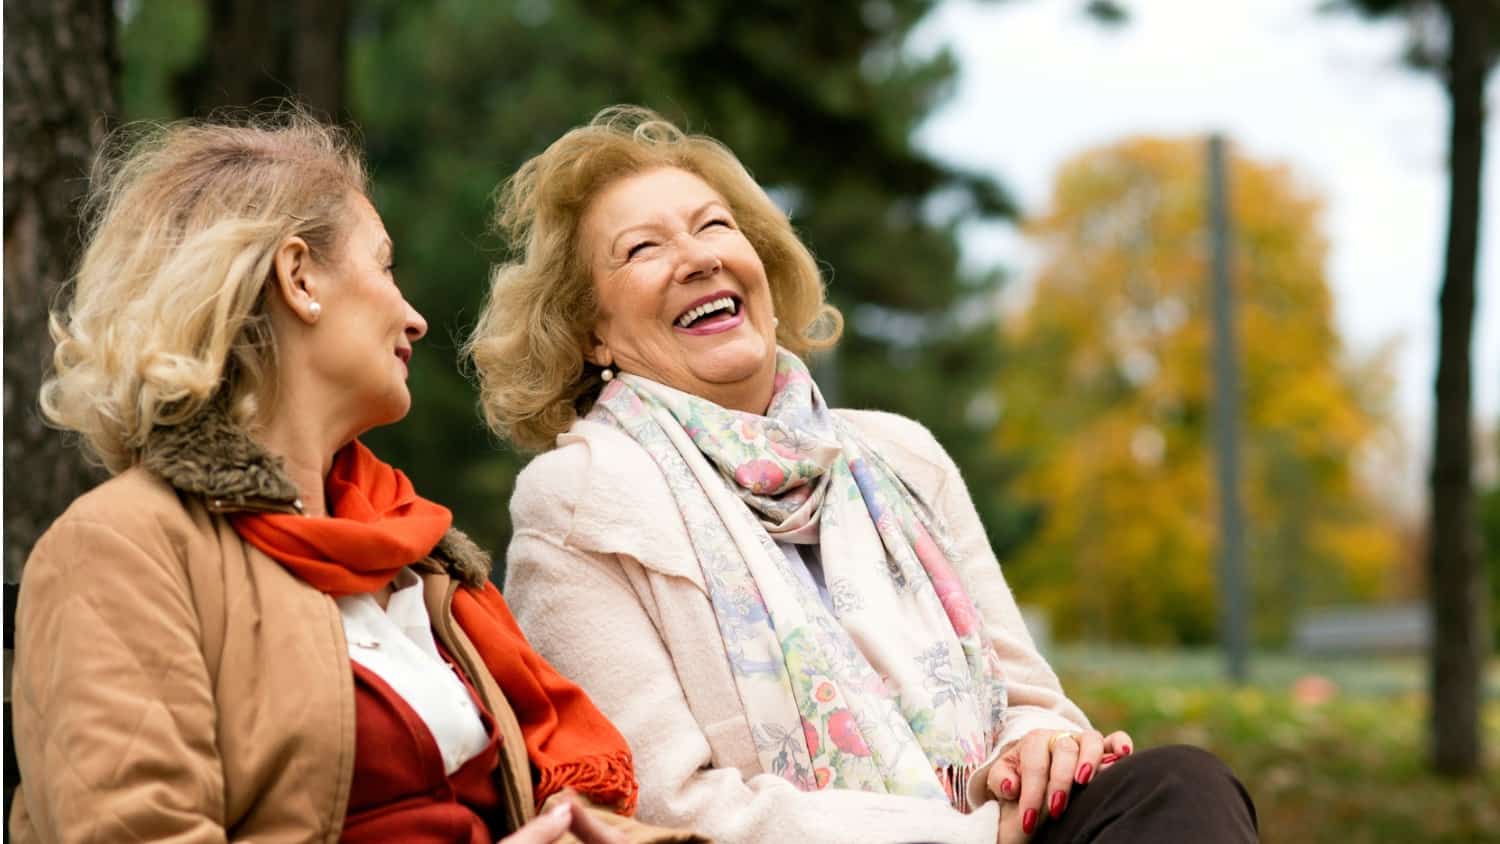 https://cdn.sixtyandme.com/wp-content/uploads/2014/07/Sixty-and-Me_60-Things-That-Women-Love-About-Being-60-Years-Old.jpg